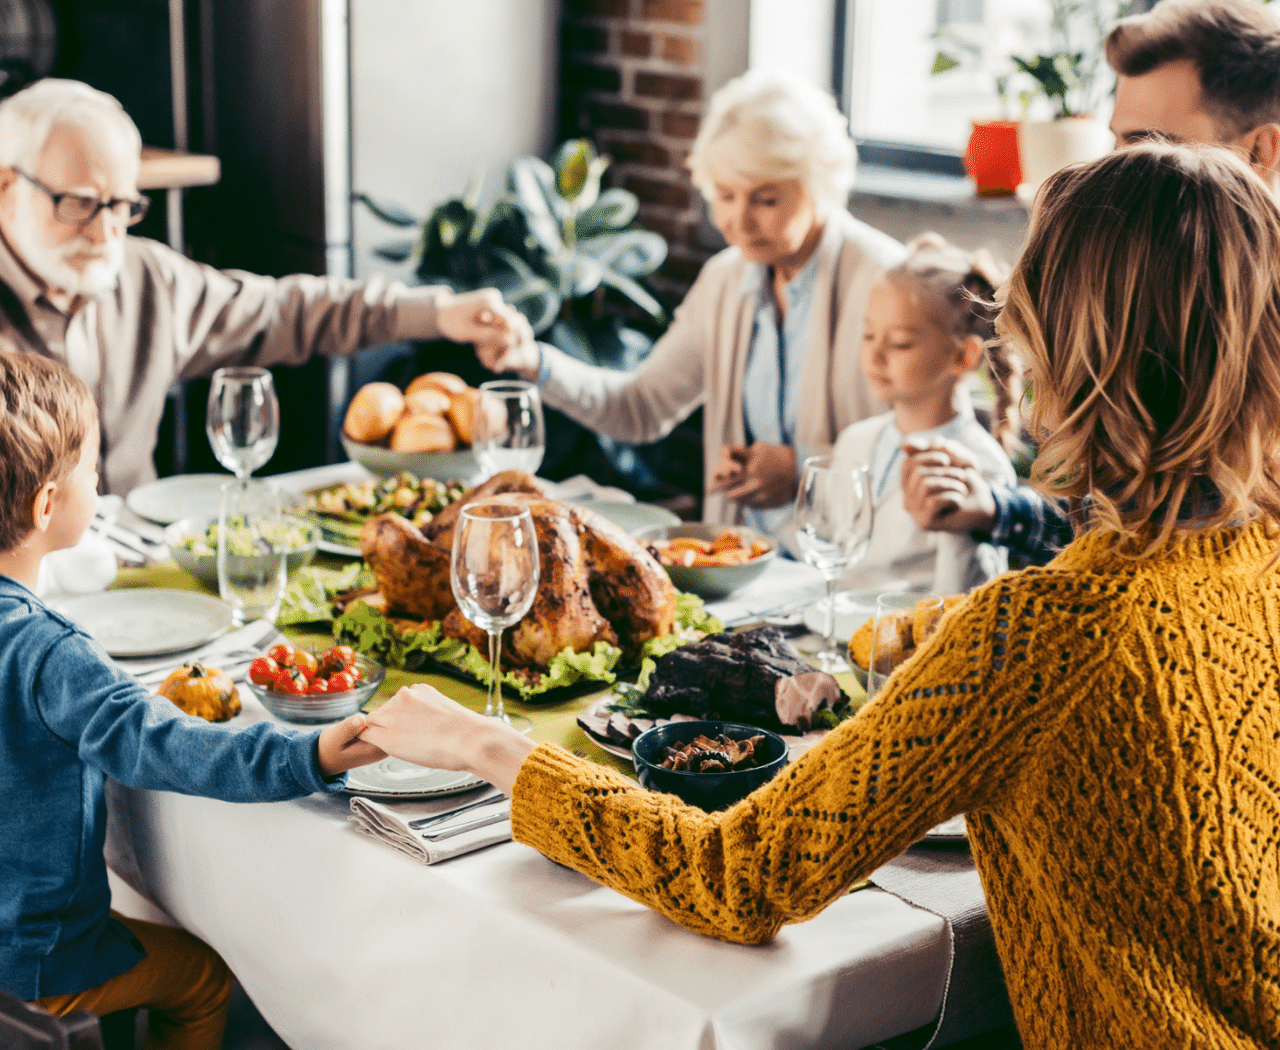 11 Ways To Stay Organized At Thanksgiving + Checklist